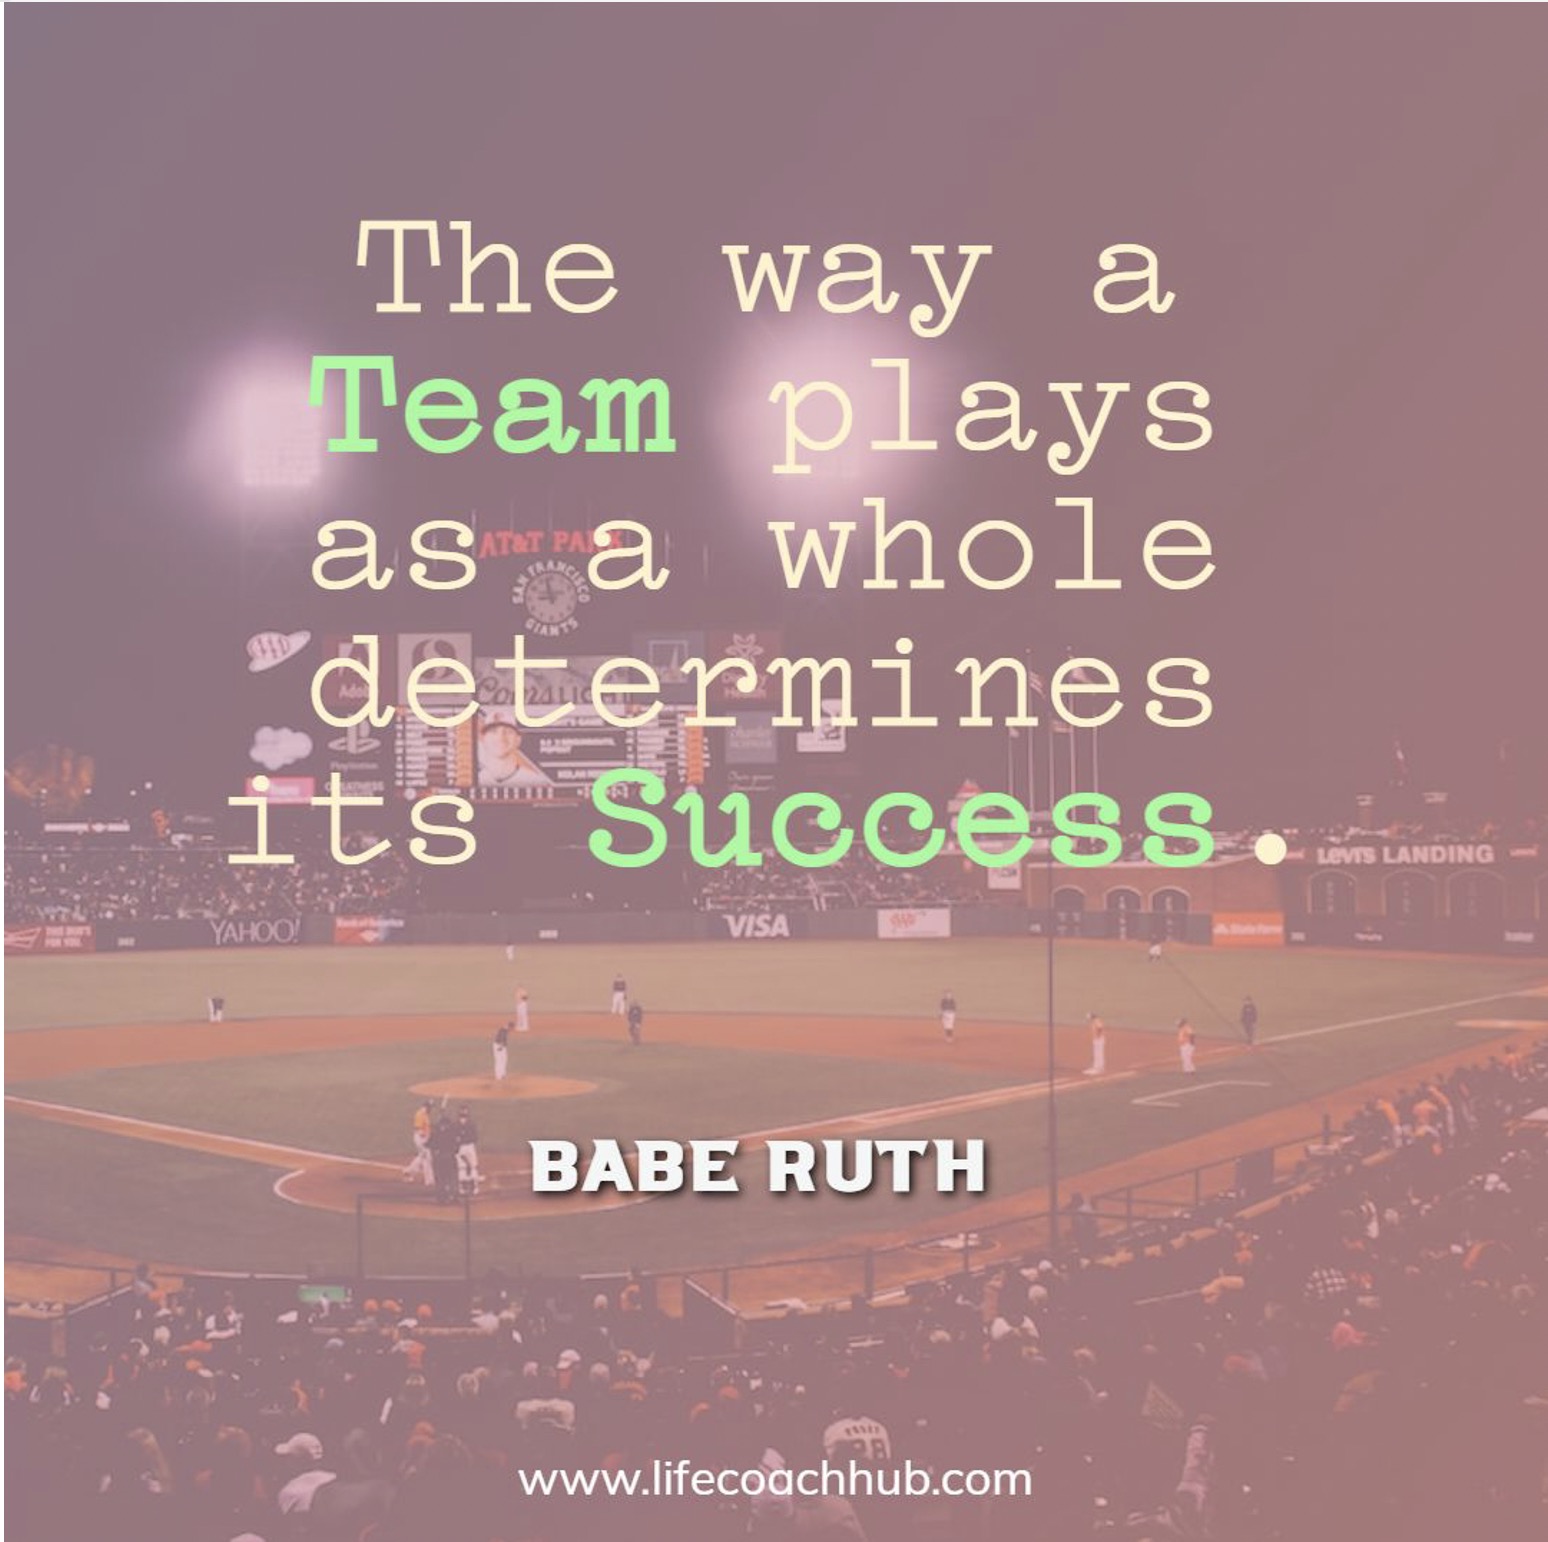 the-way-team-plays-whole-determines-success-babe-ruth-business-coaching-quote